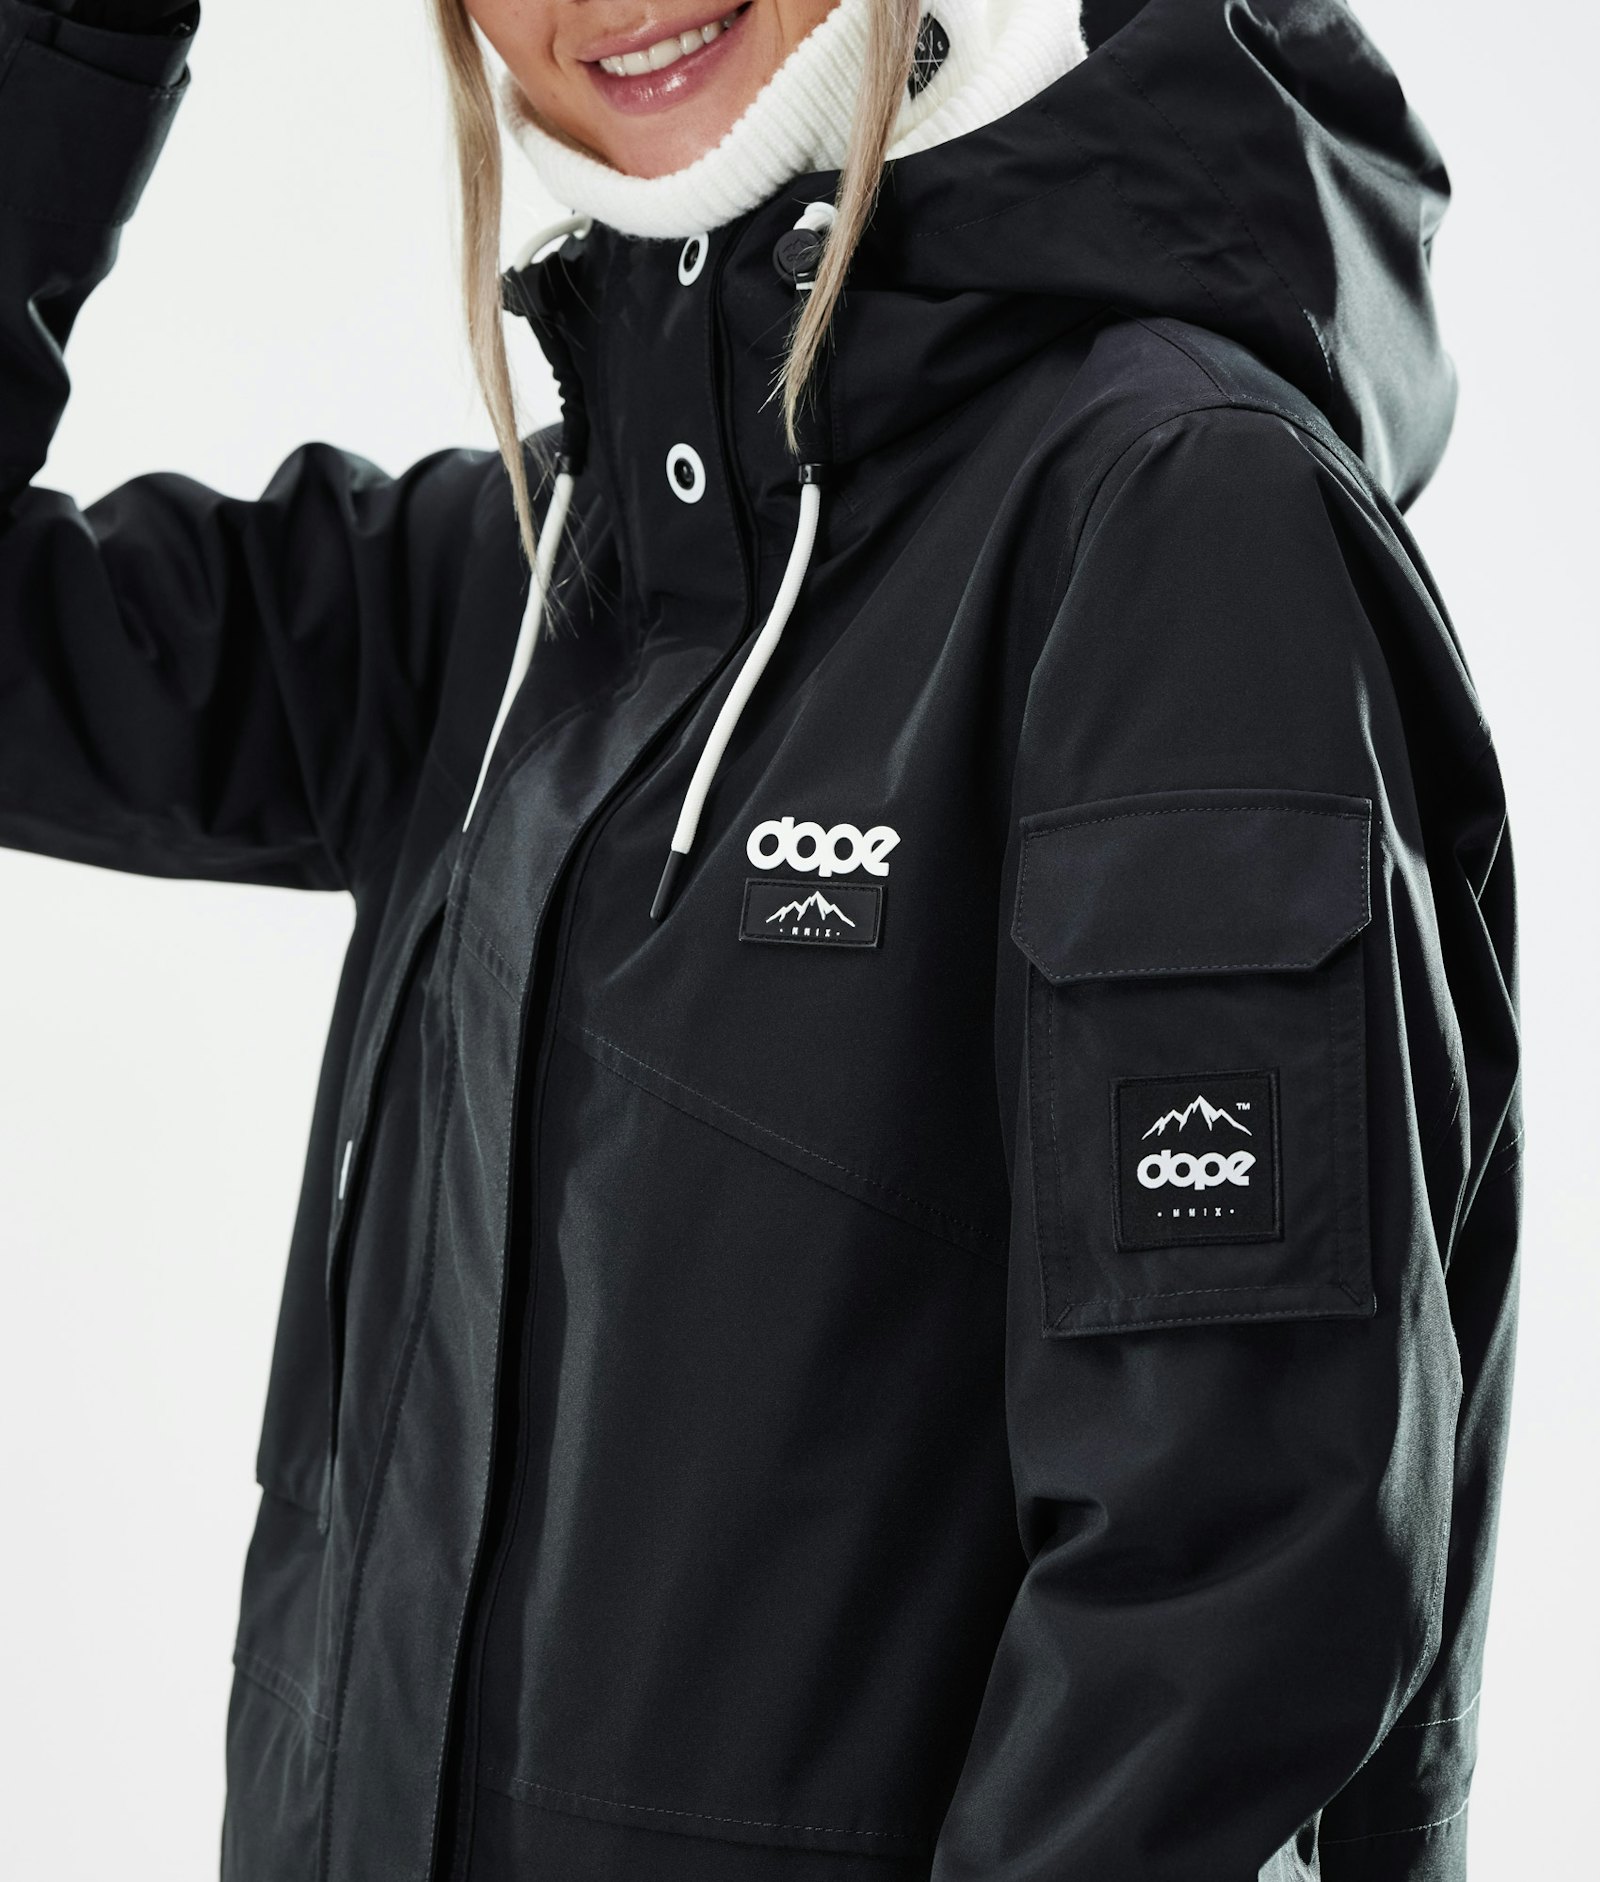 Dope Adept W 2021 Giacca Sci Donna Black